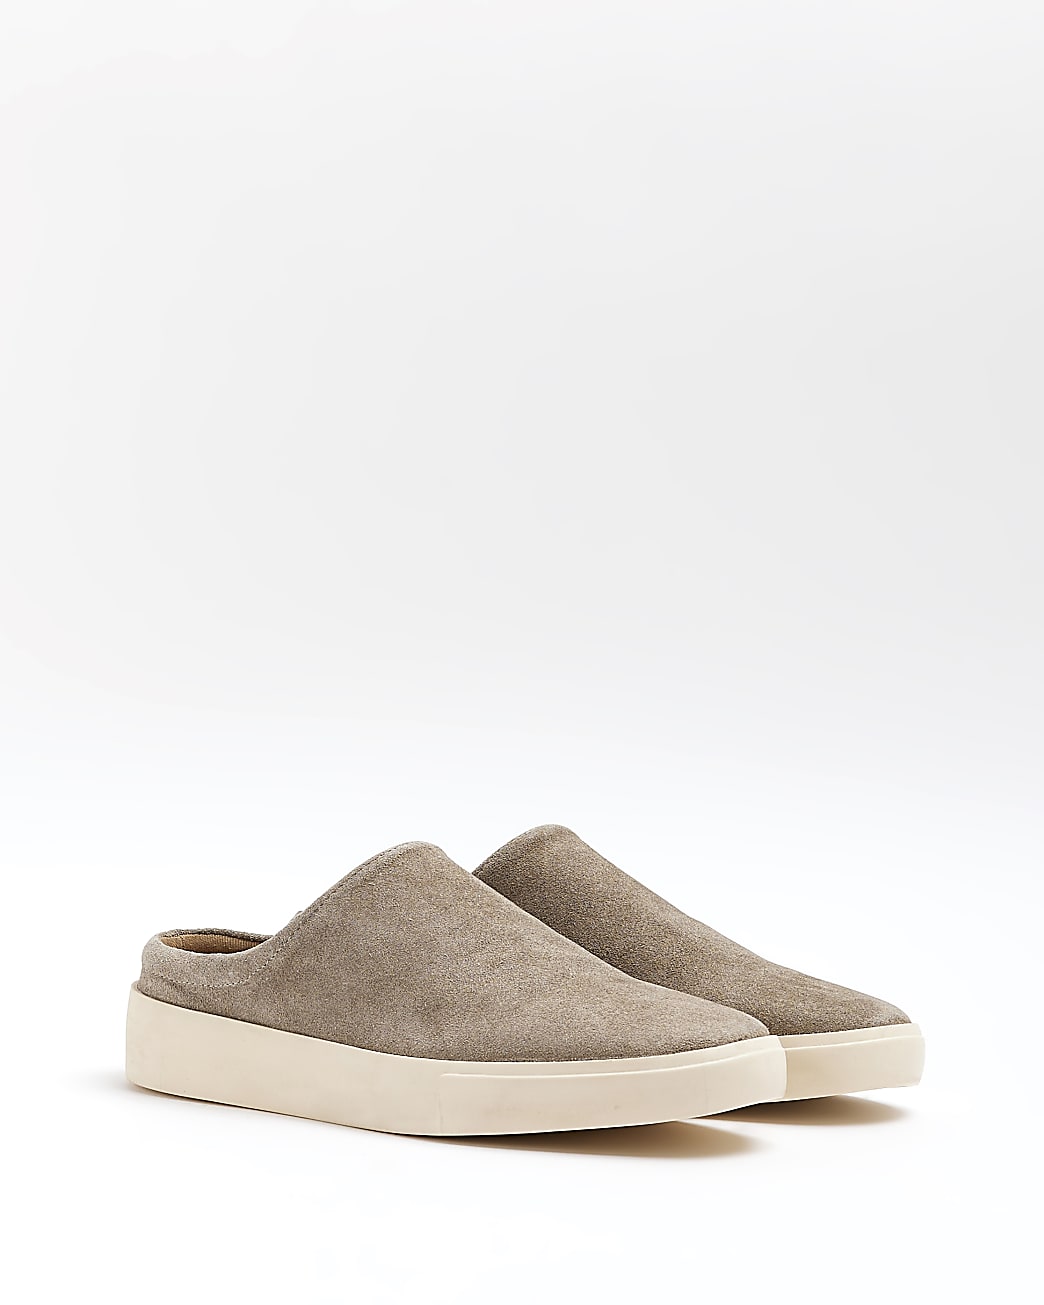 RIVER ISLAND GREY SUEDE BACKLESS LOAFERS